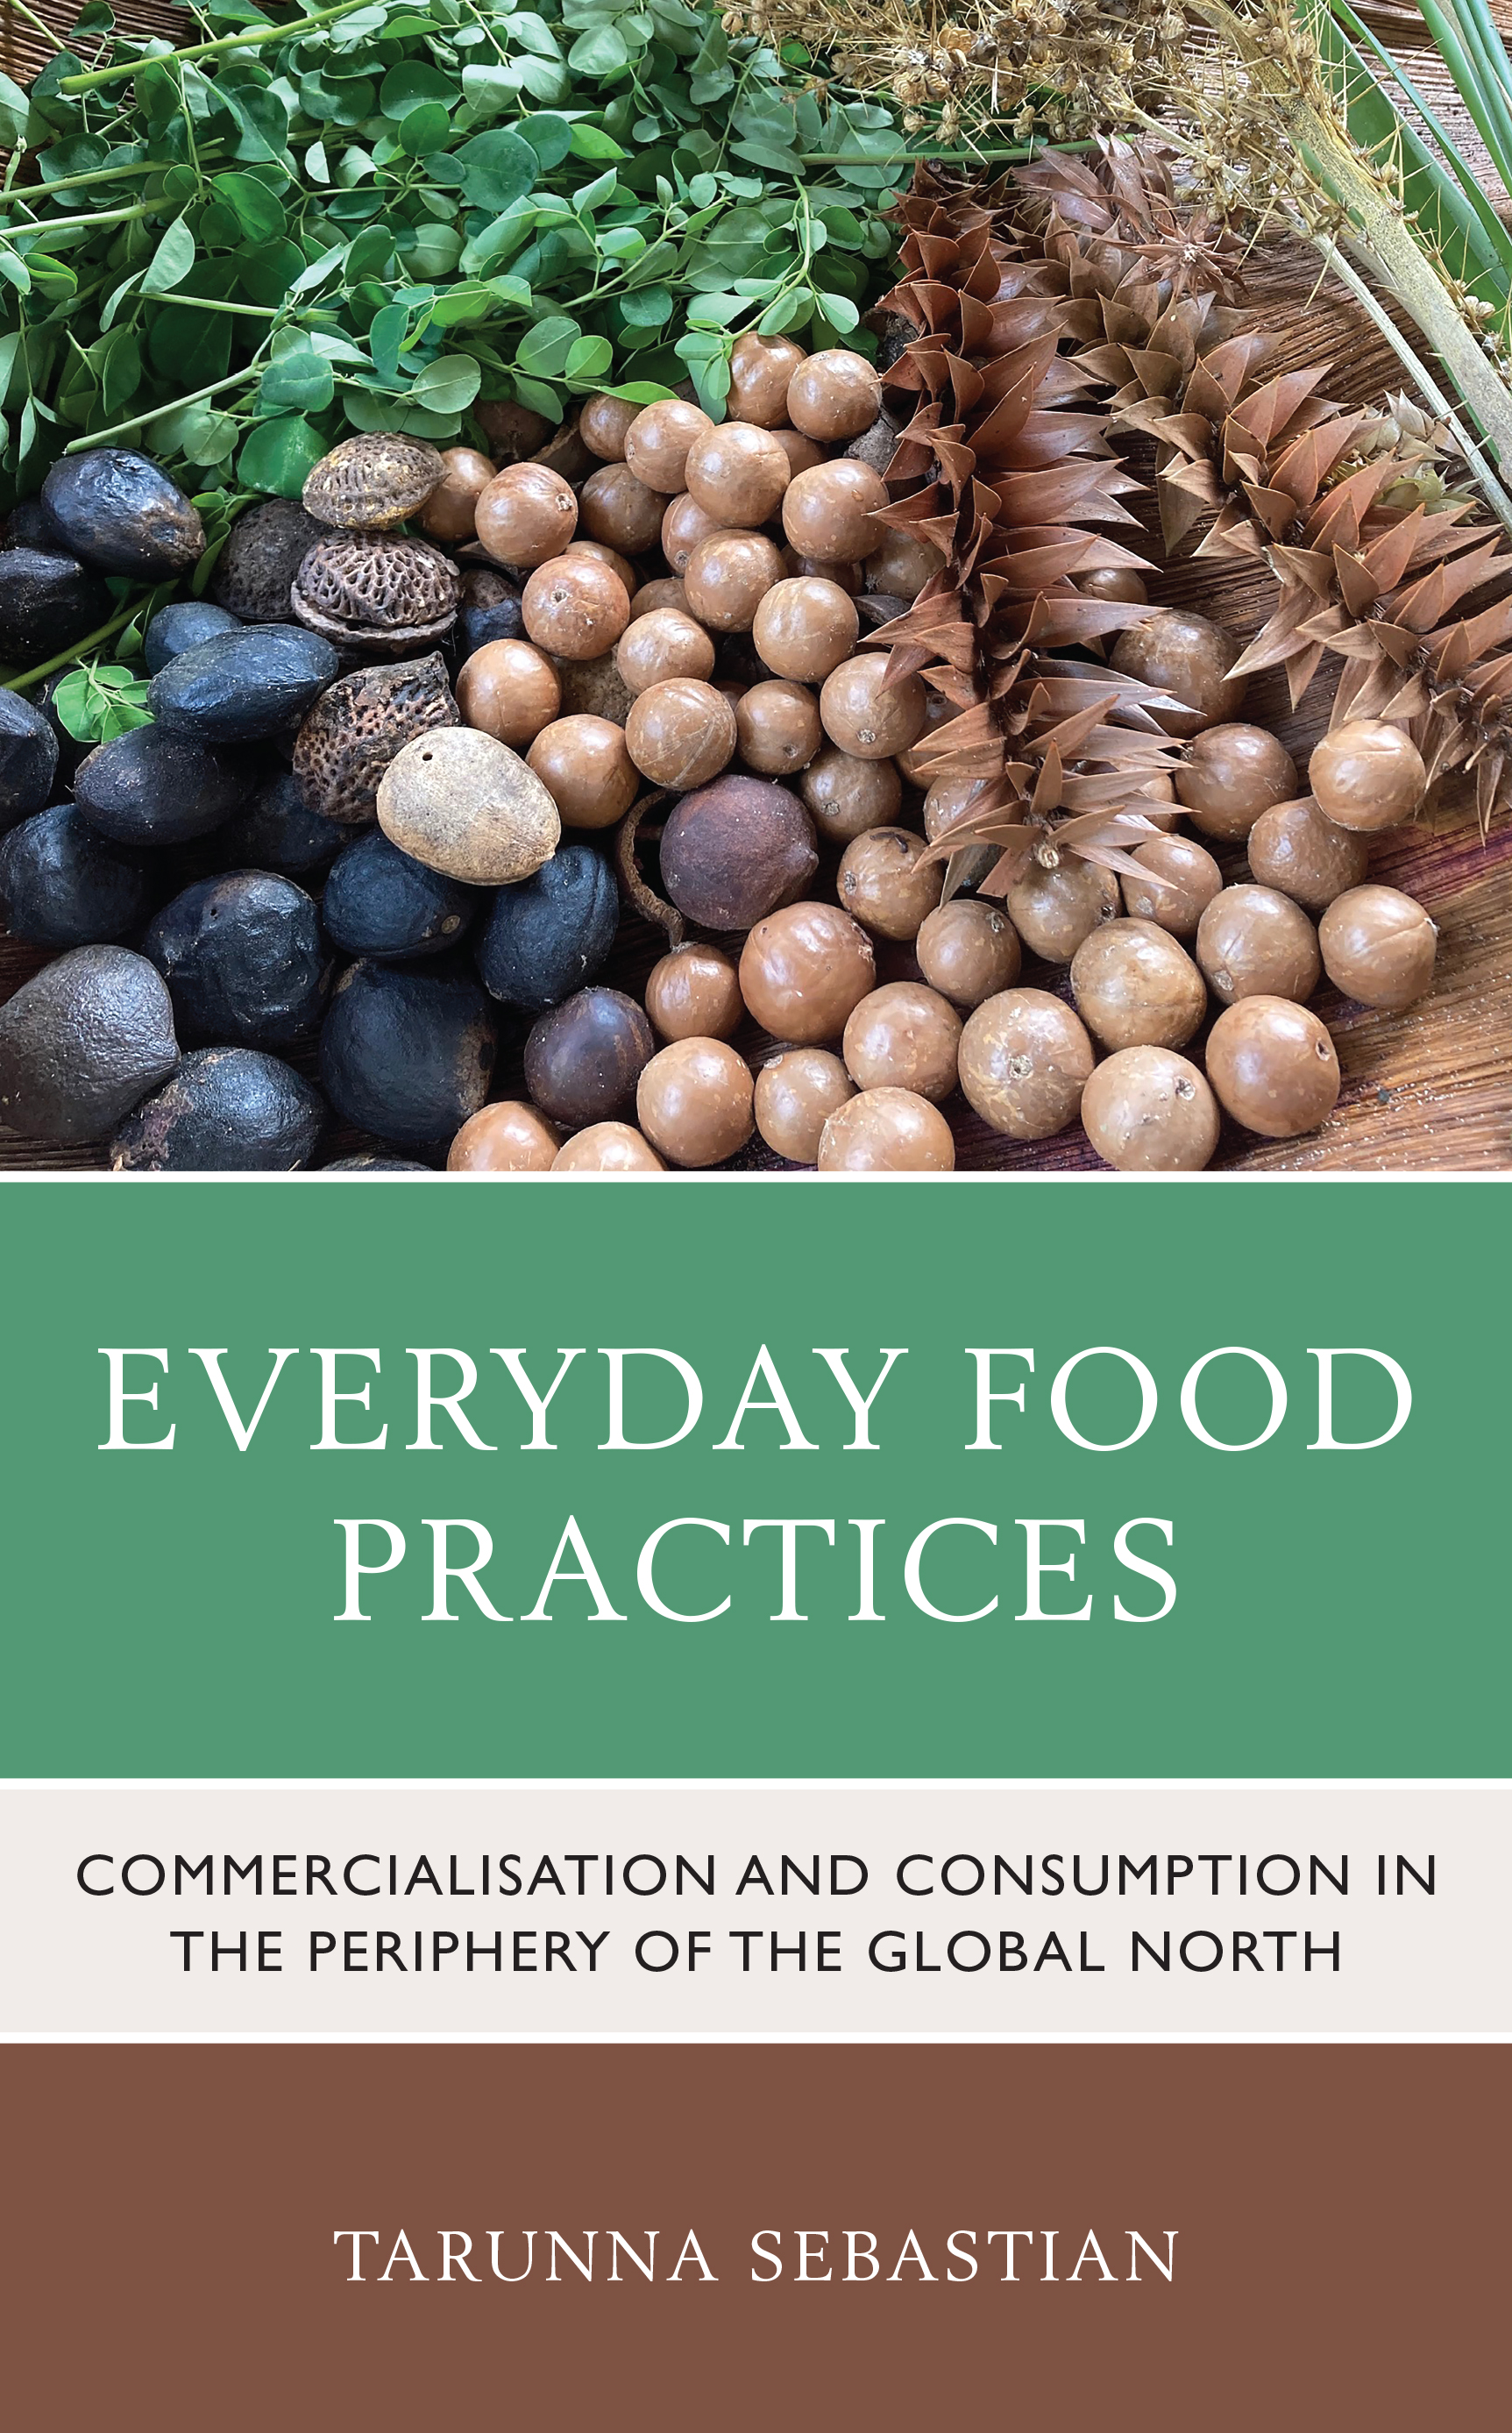 Everyday Food Practices: Commercialisation and Consumption in the Periphery of the Global North